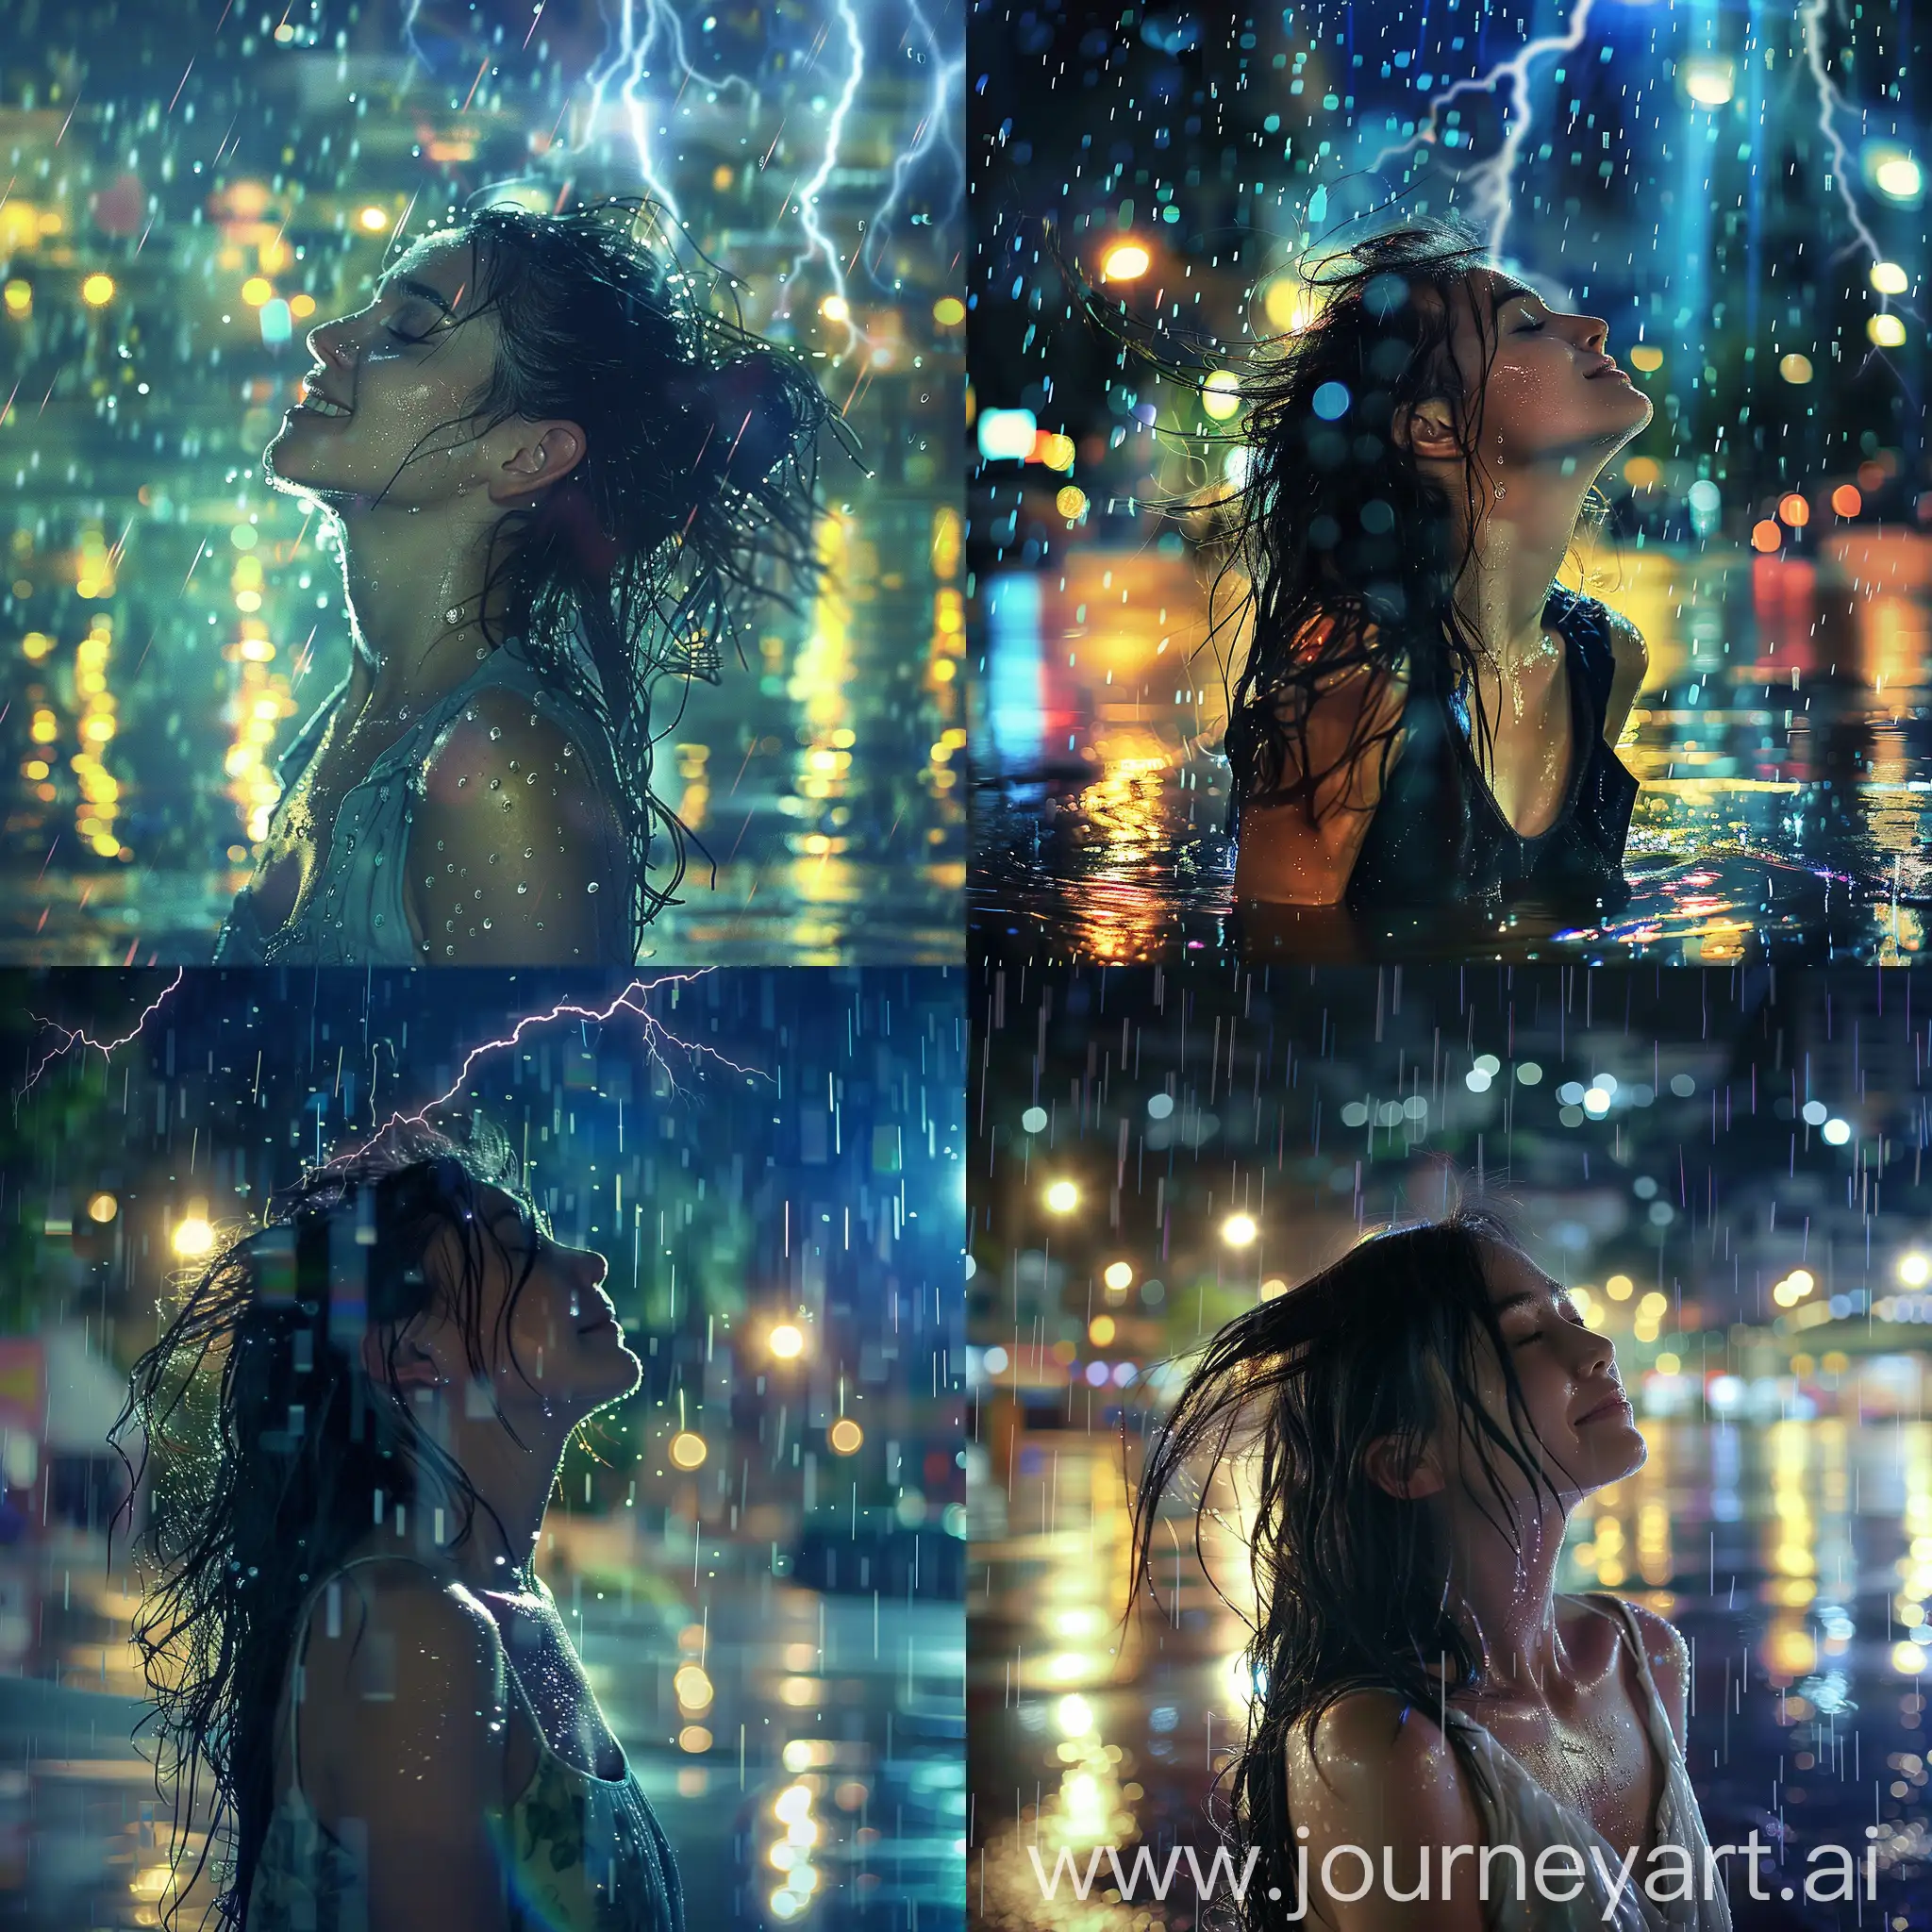 Woman-Smiling-in-Rain-with-City-Lights-Reflection